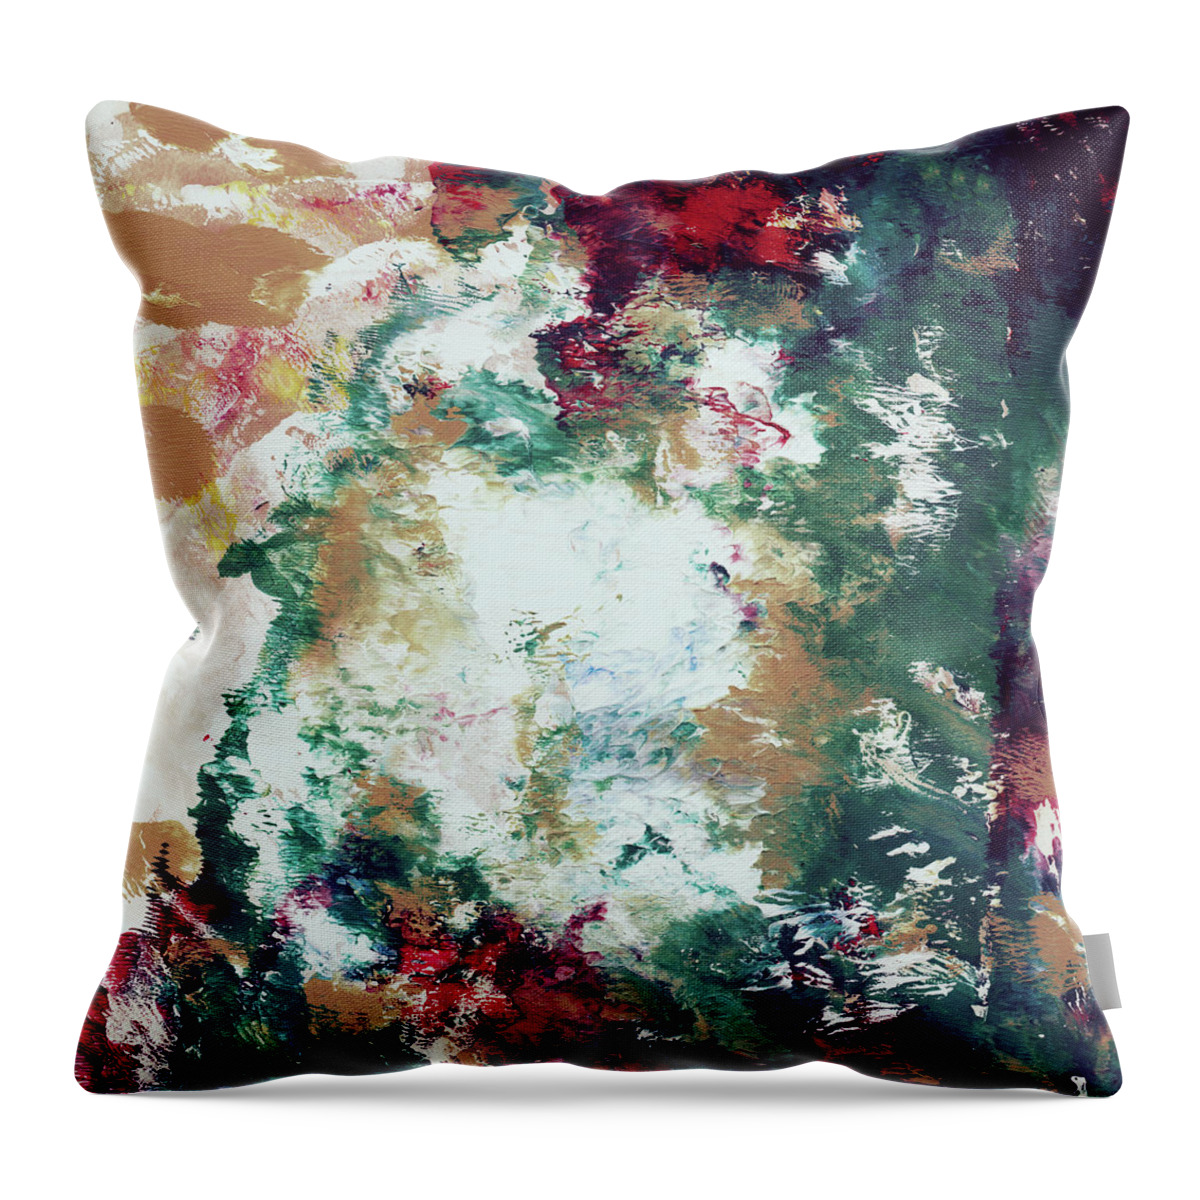 Abstract Throw Pillow featuring the mixed media Wonderland 5- Art by Linda Woods by Linda Woods